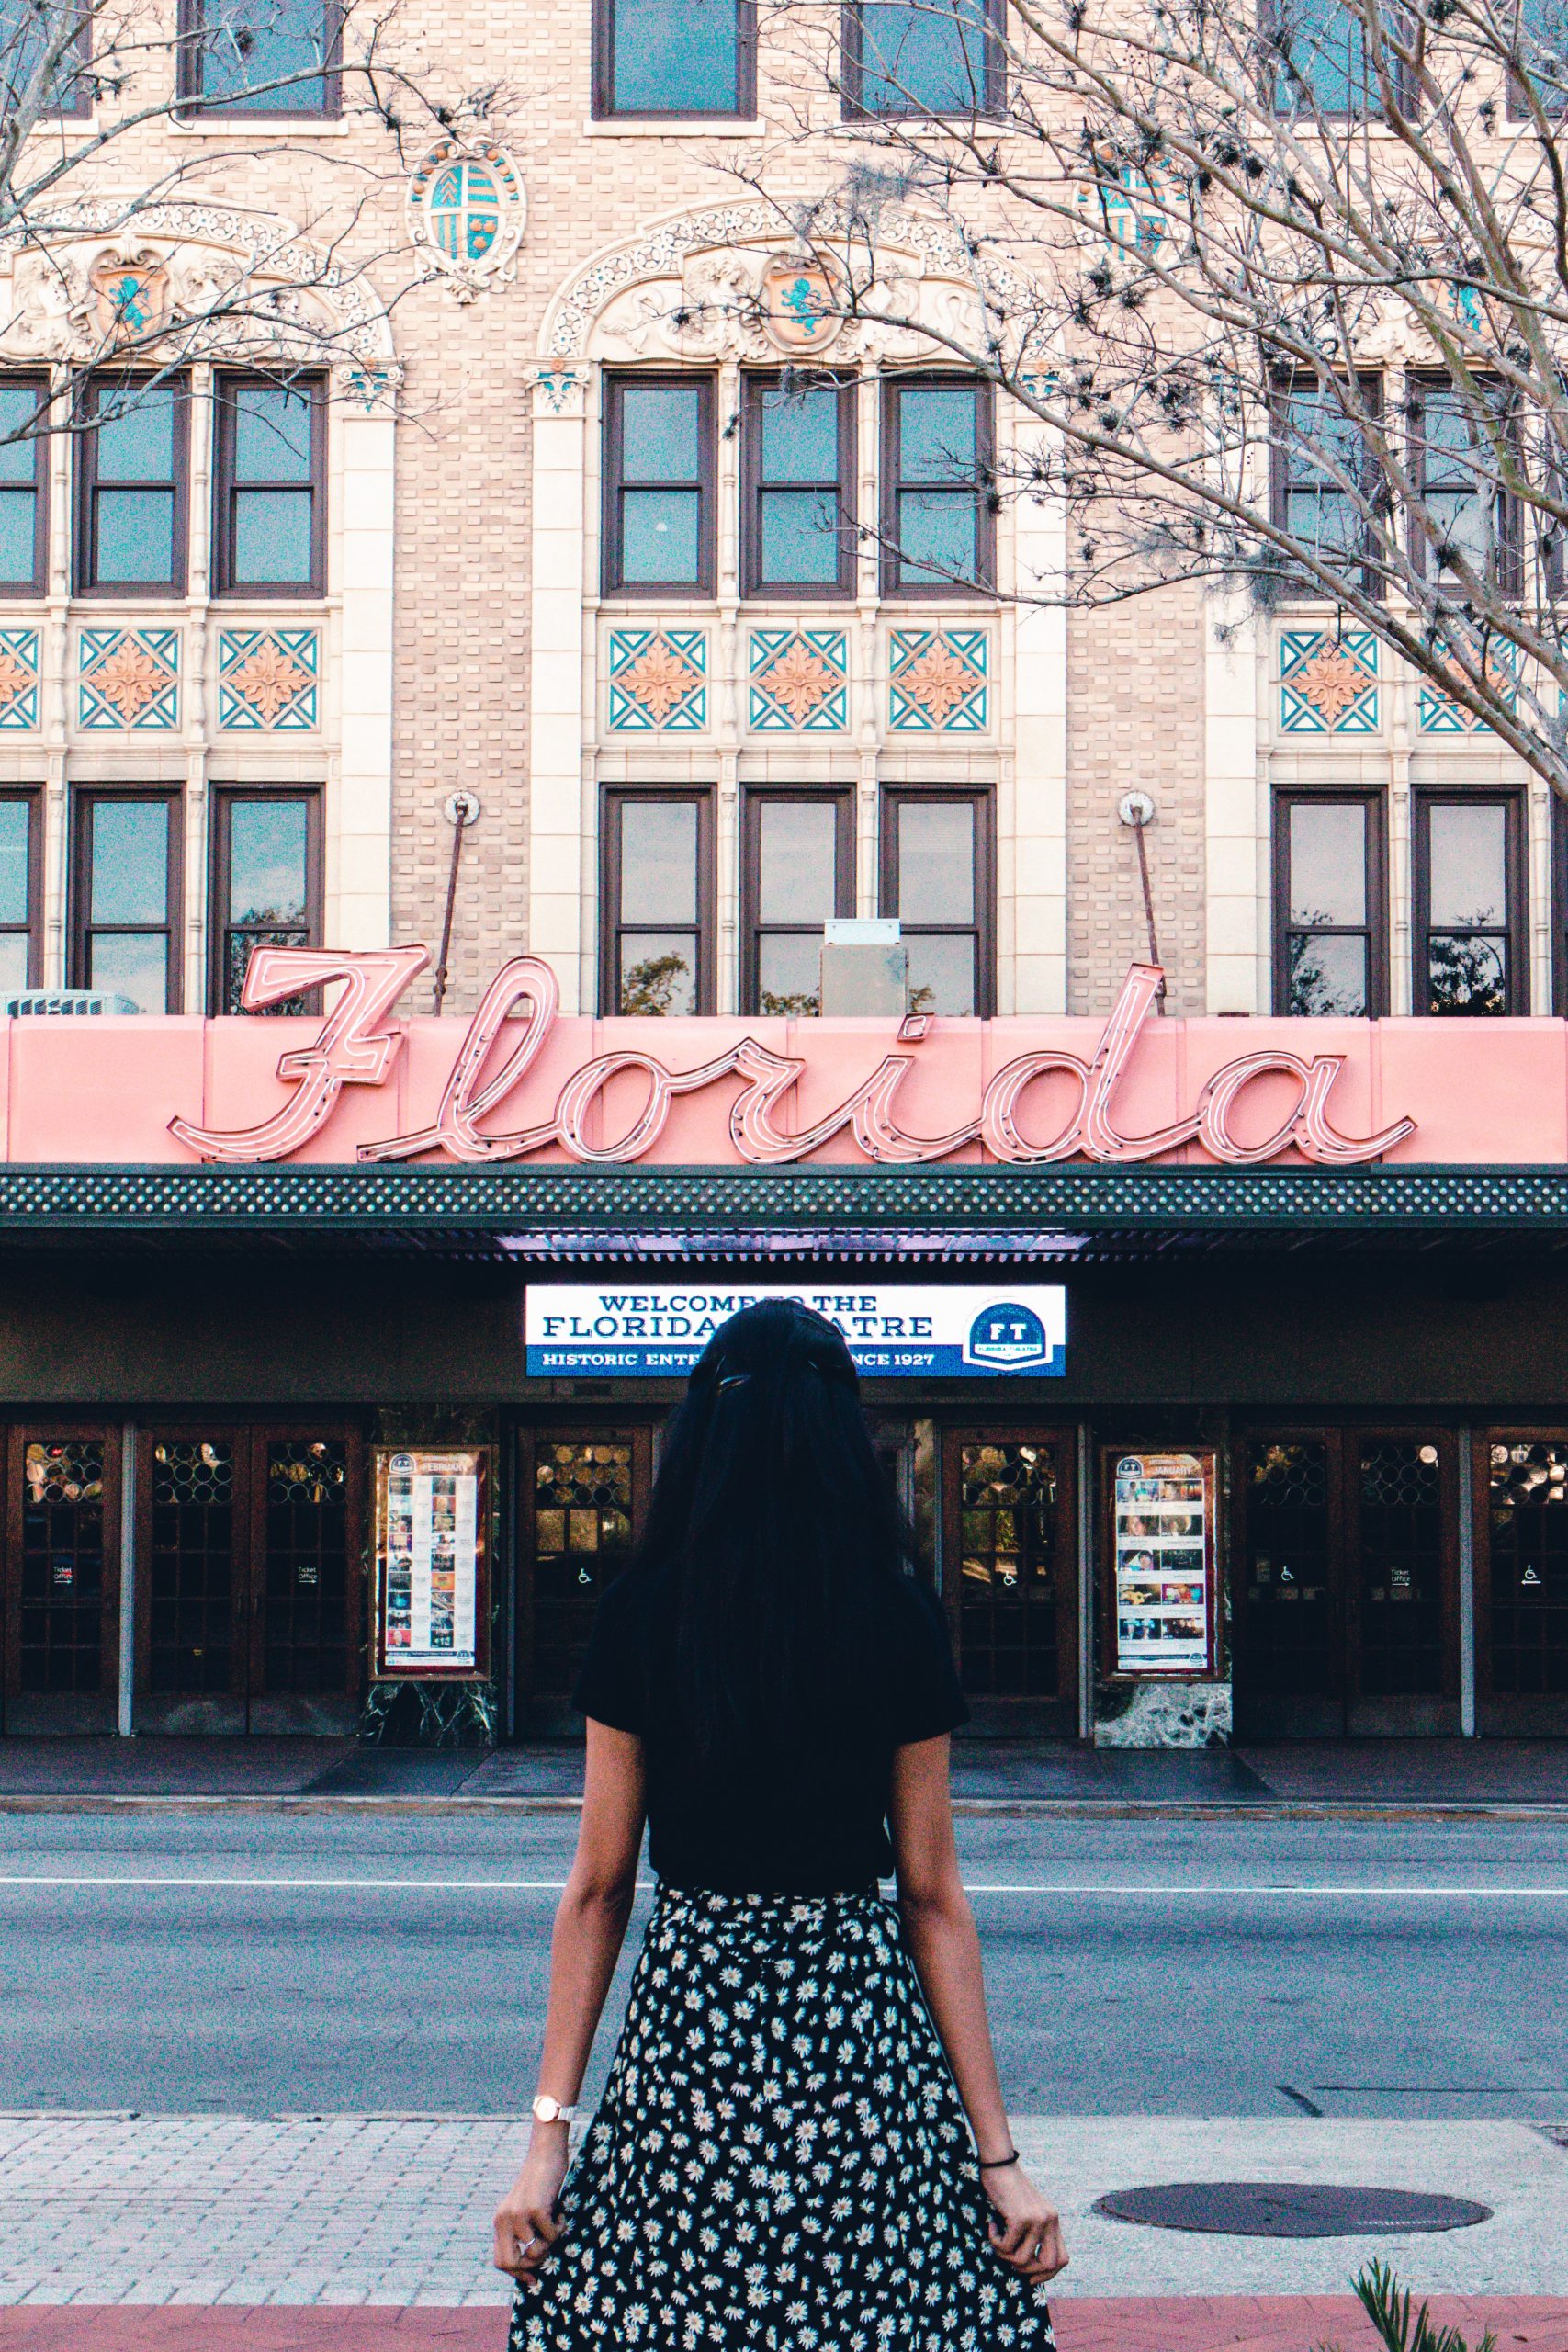 A woman in a polka dot dress standing in front of a theater.